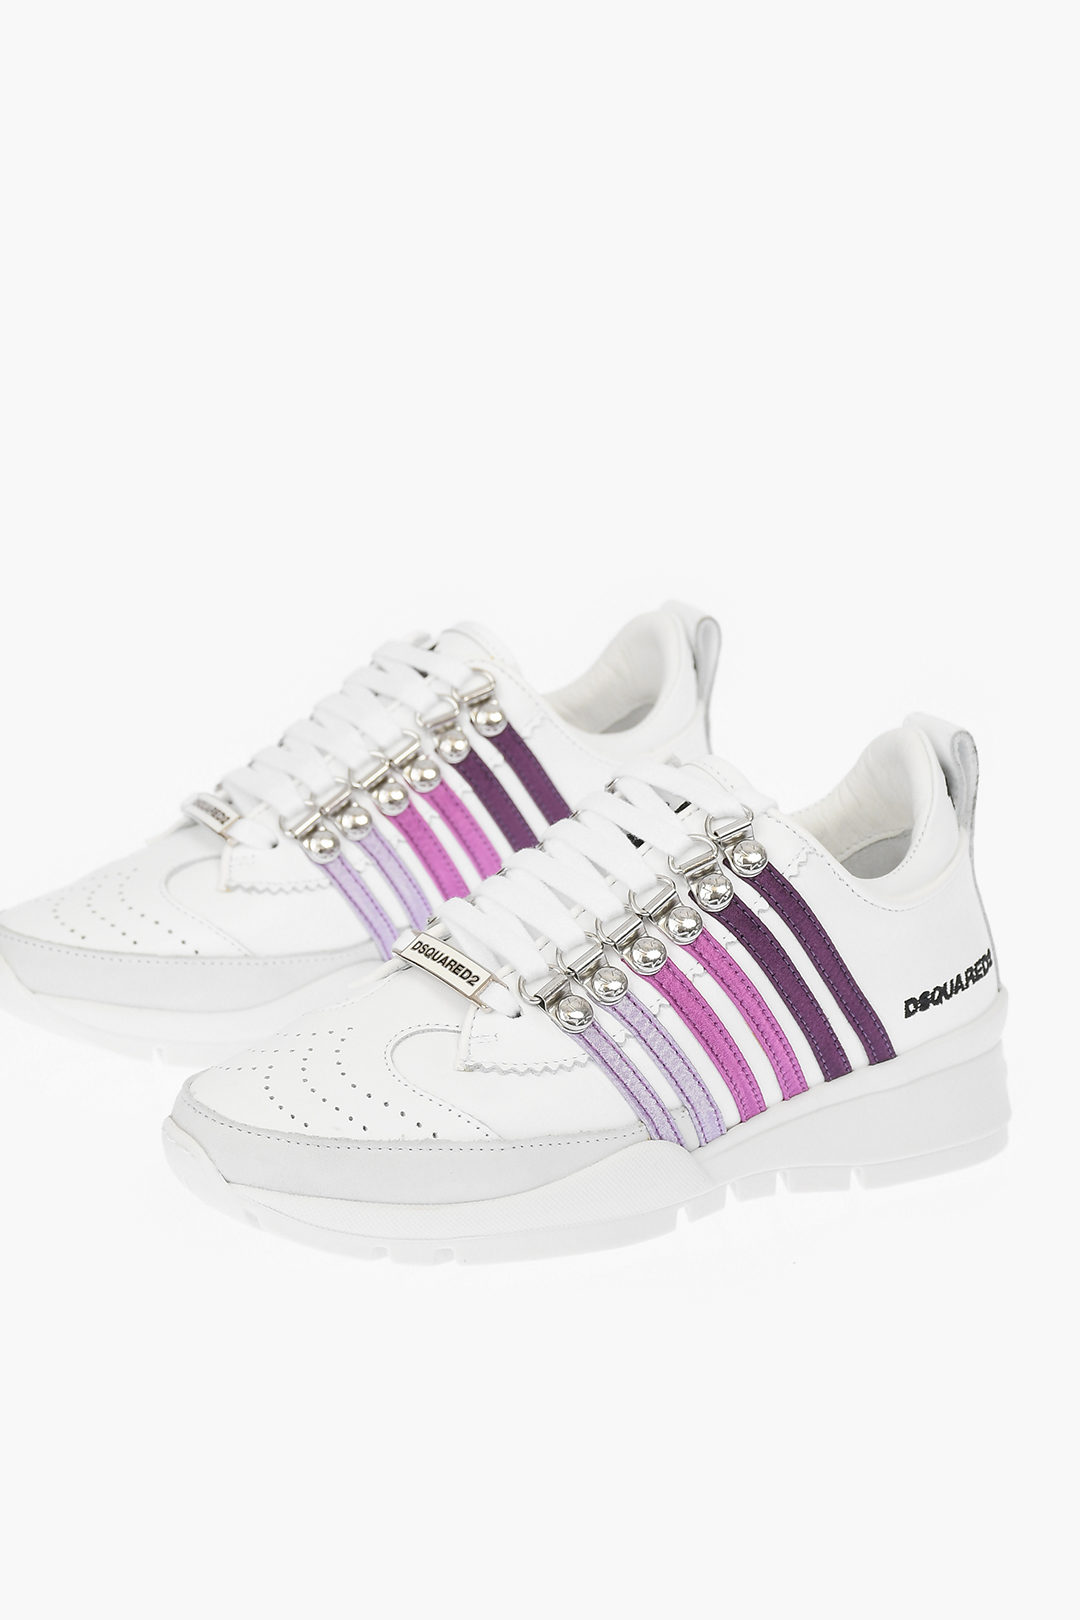 Uil Extractie Brig Dsquared2 contrasting details leather sneakers women - Glamood Outlet